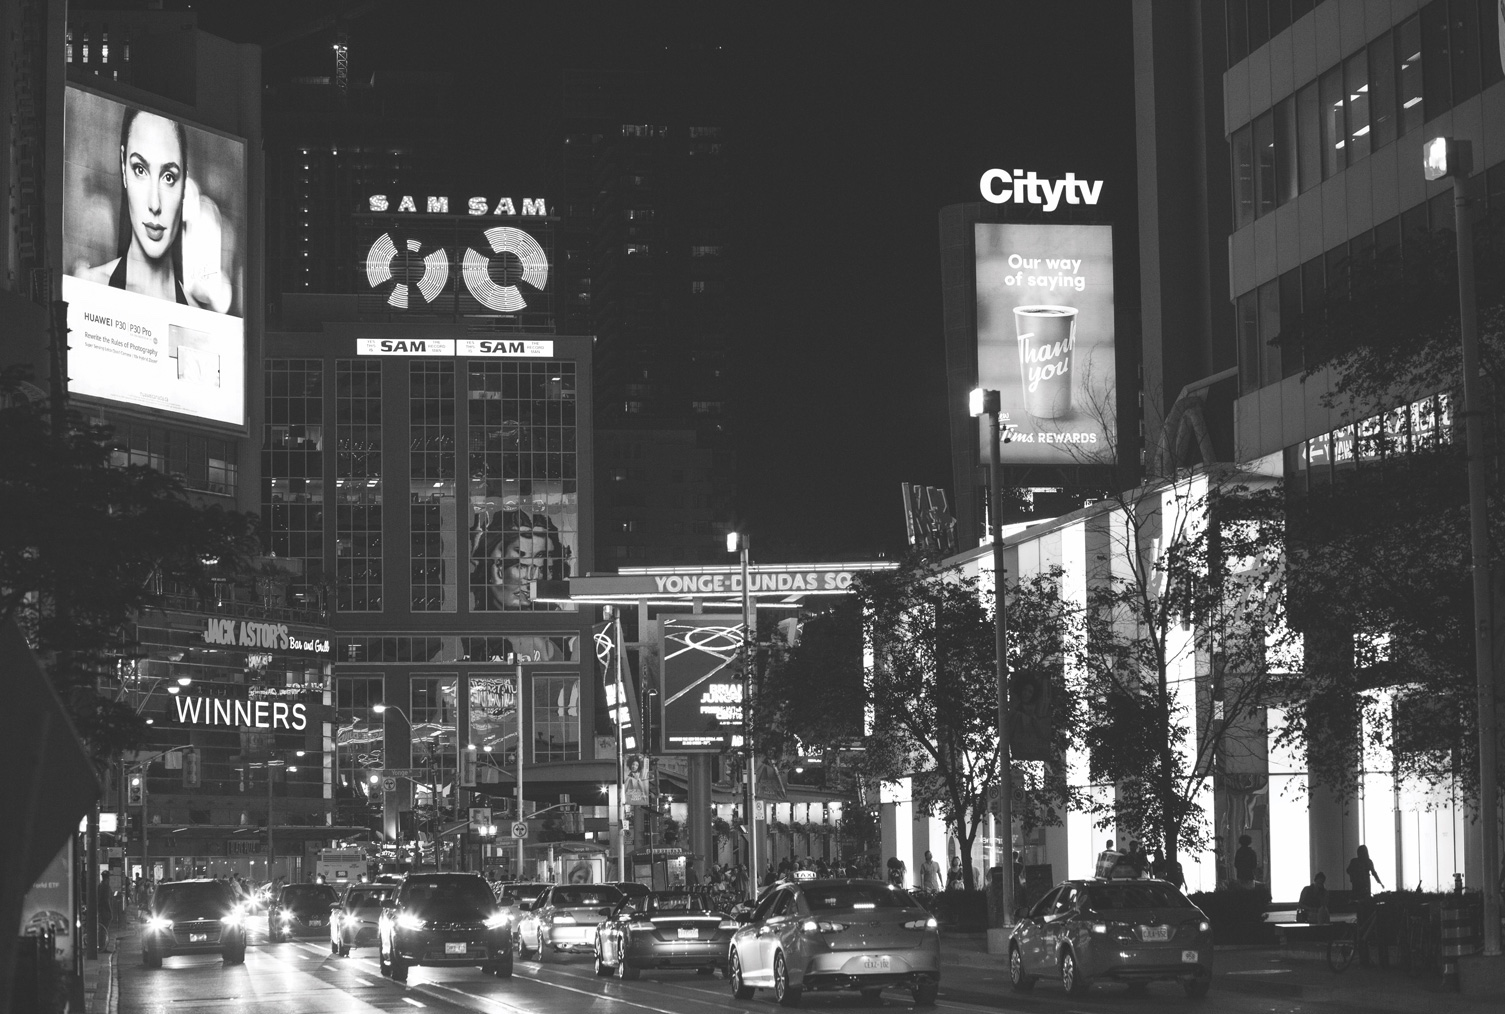 Toronto streets in black and white - The One